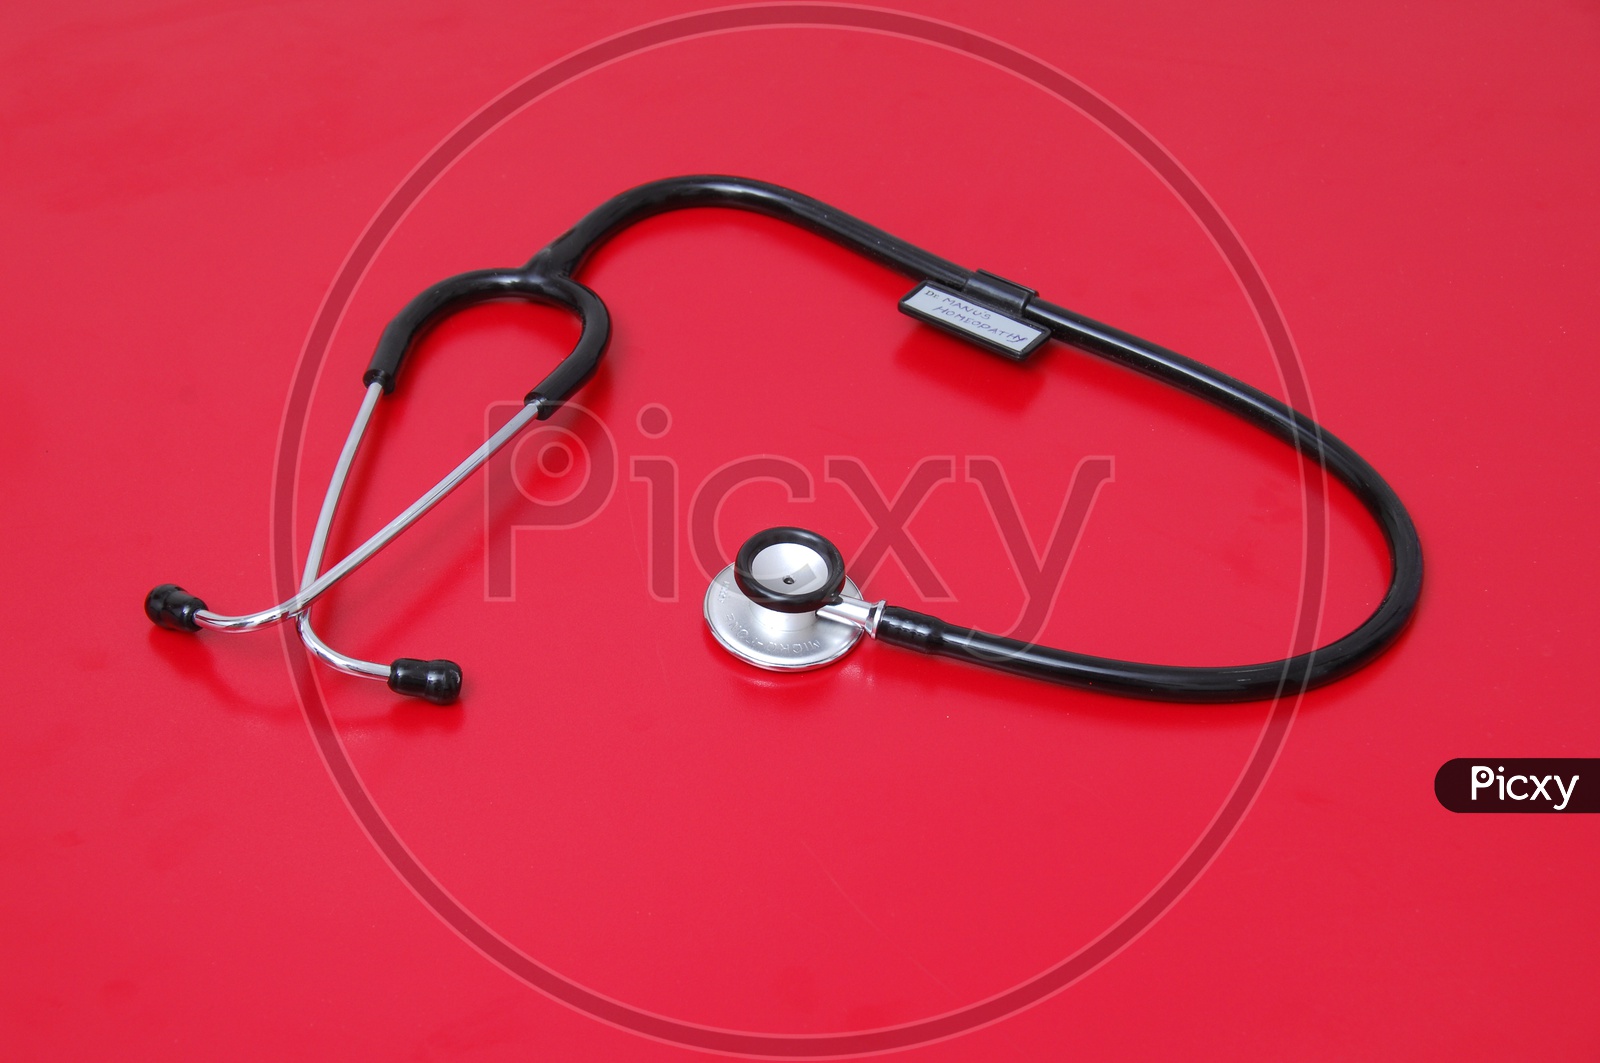 Photograph of stethoscope on red background